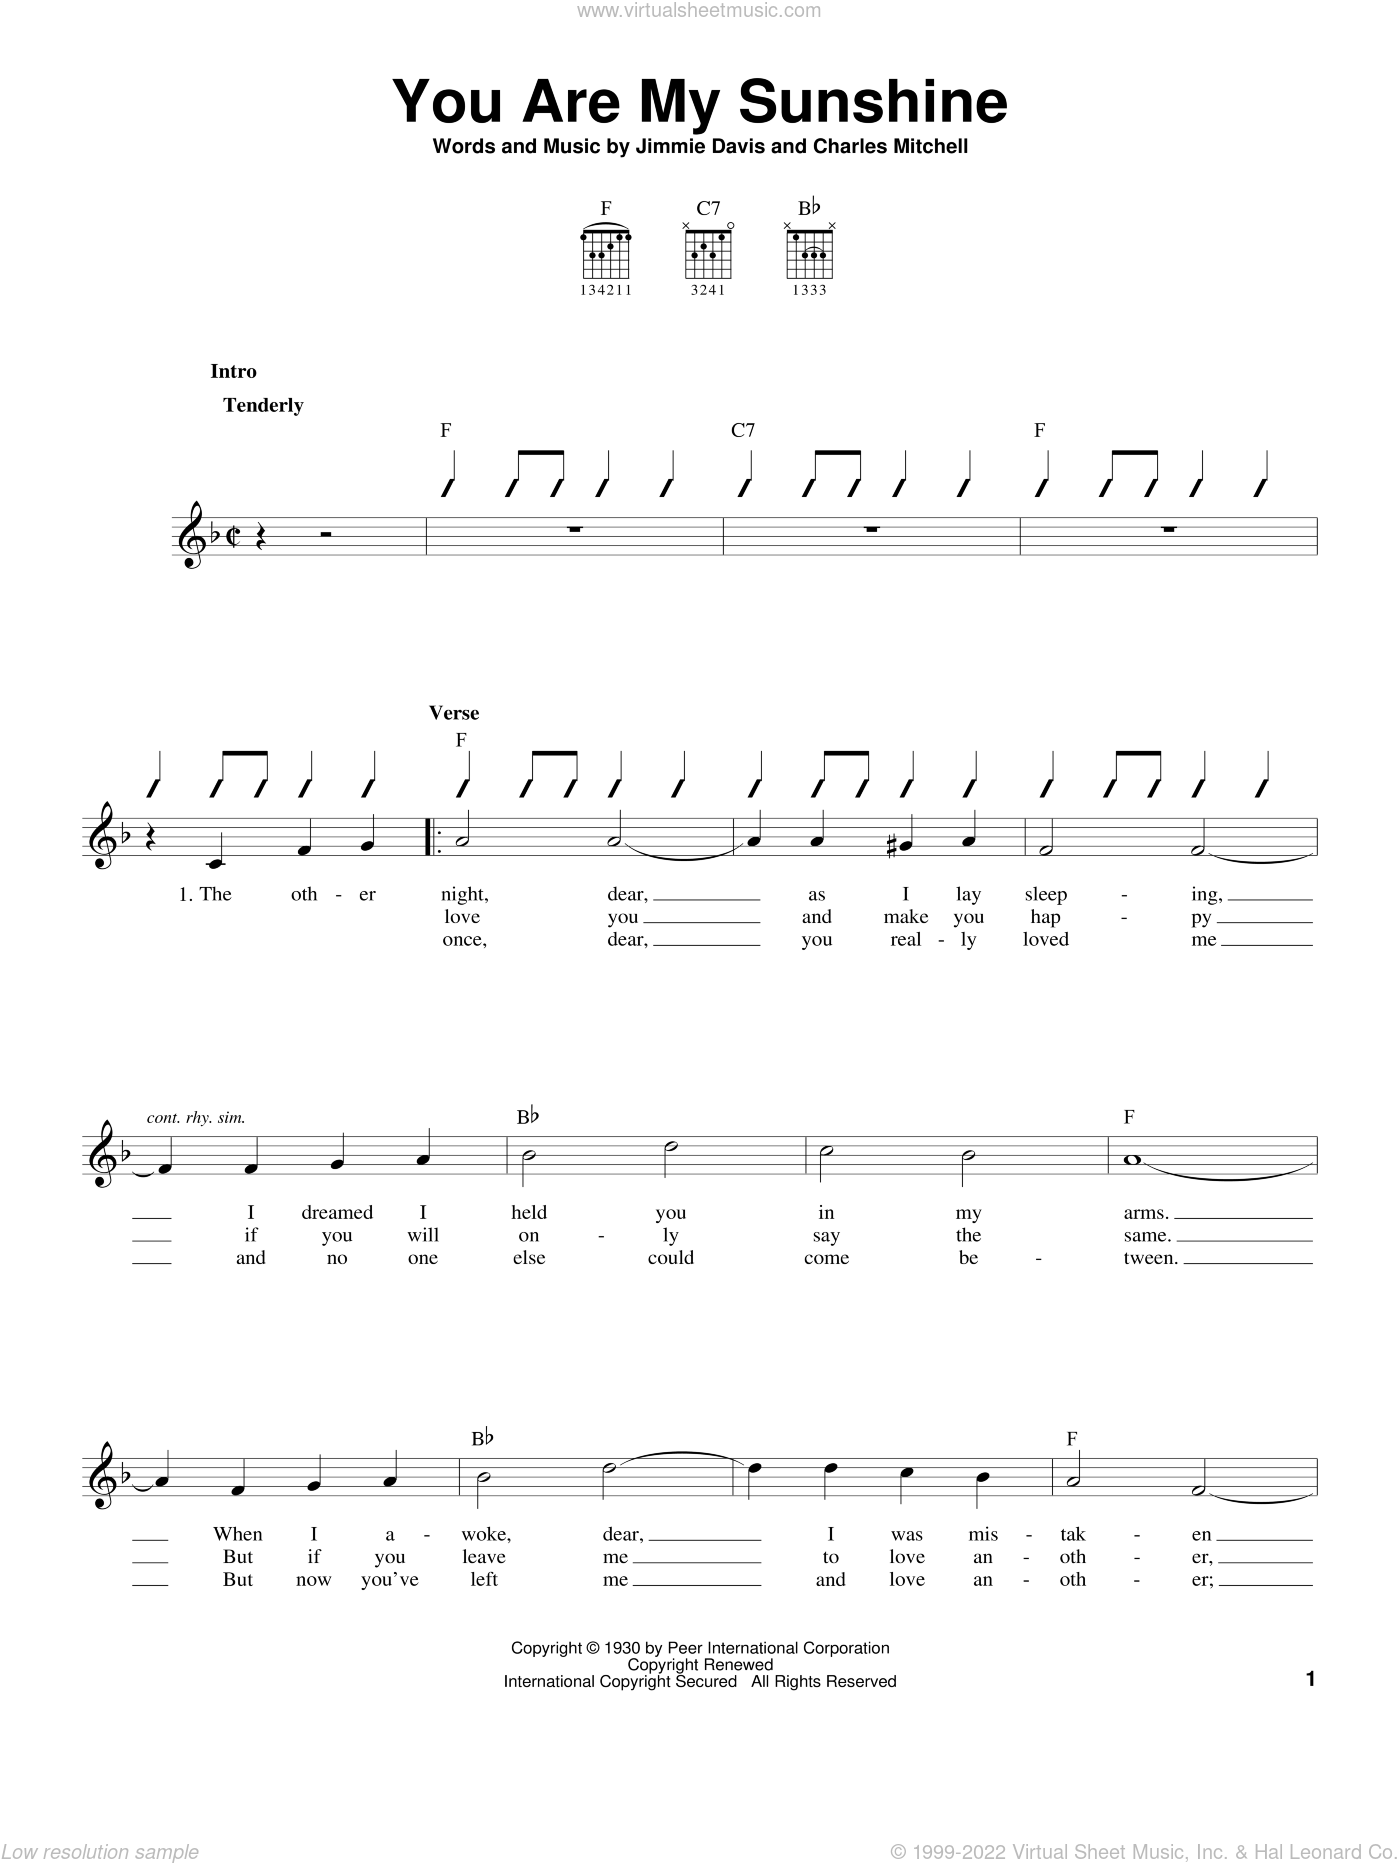 Charles - You Are My Sunshine sheet music for guitar solo (chords)